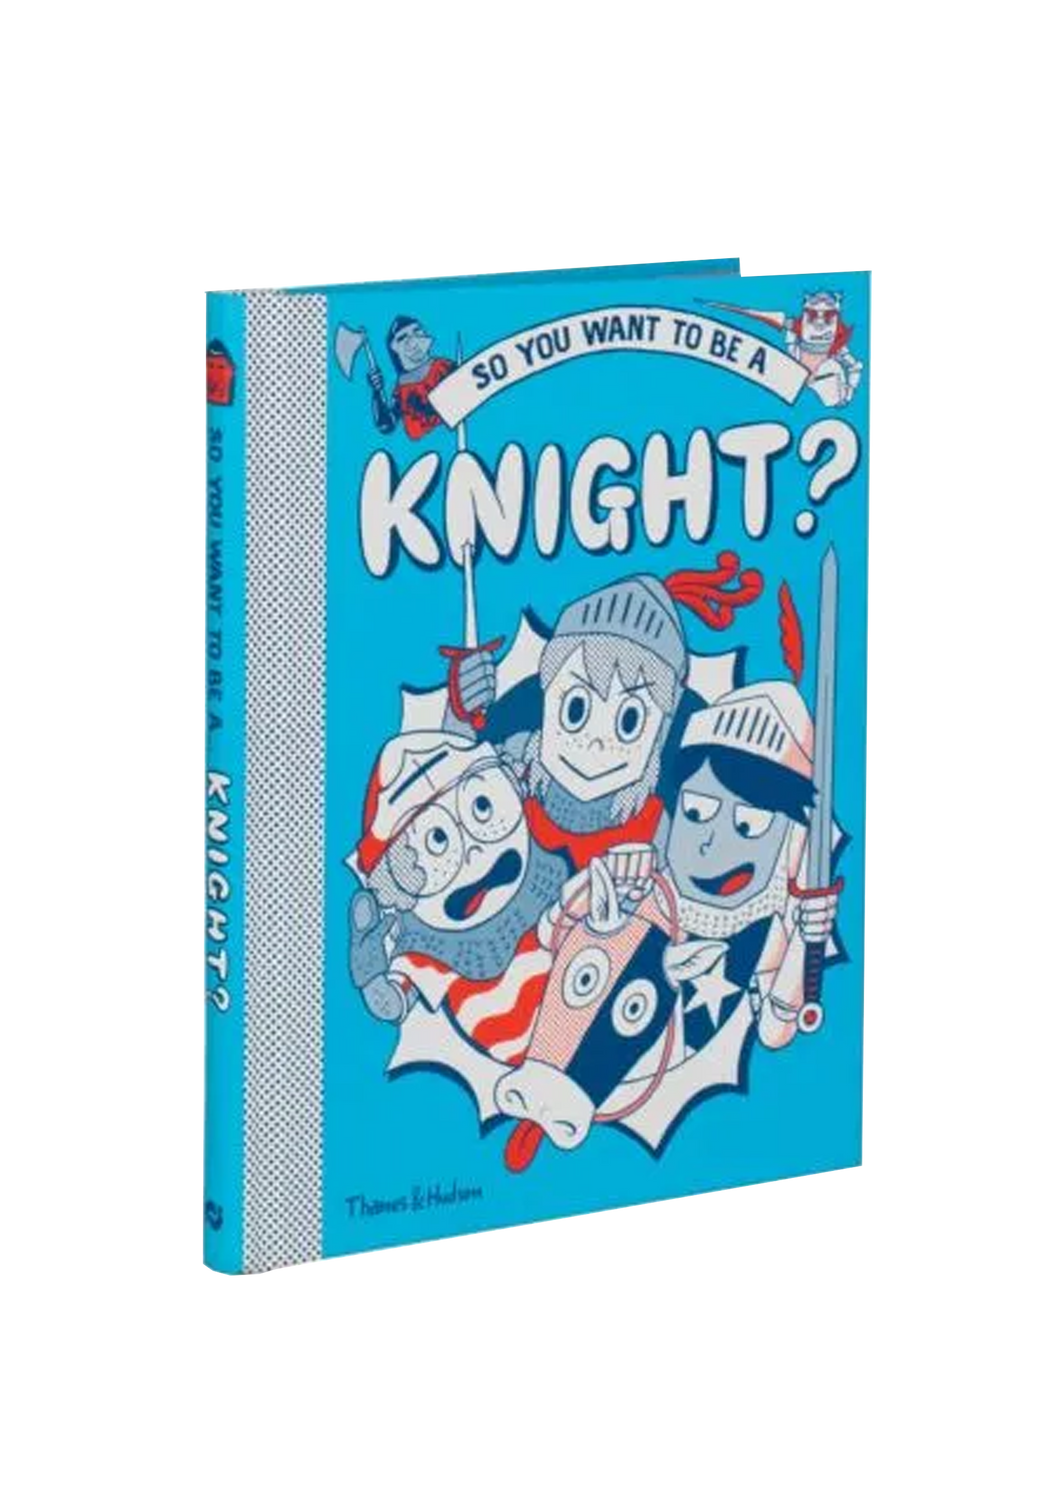 So You Want to be a Knight, Book